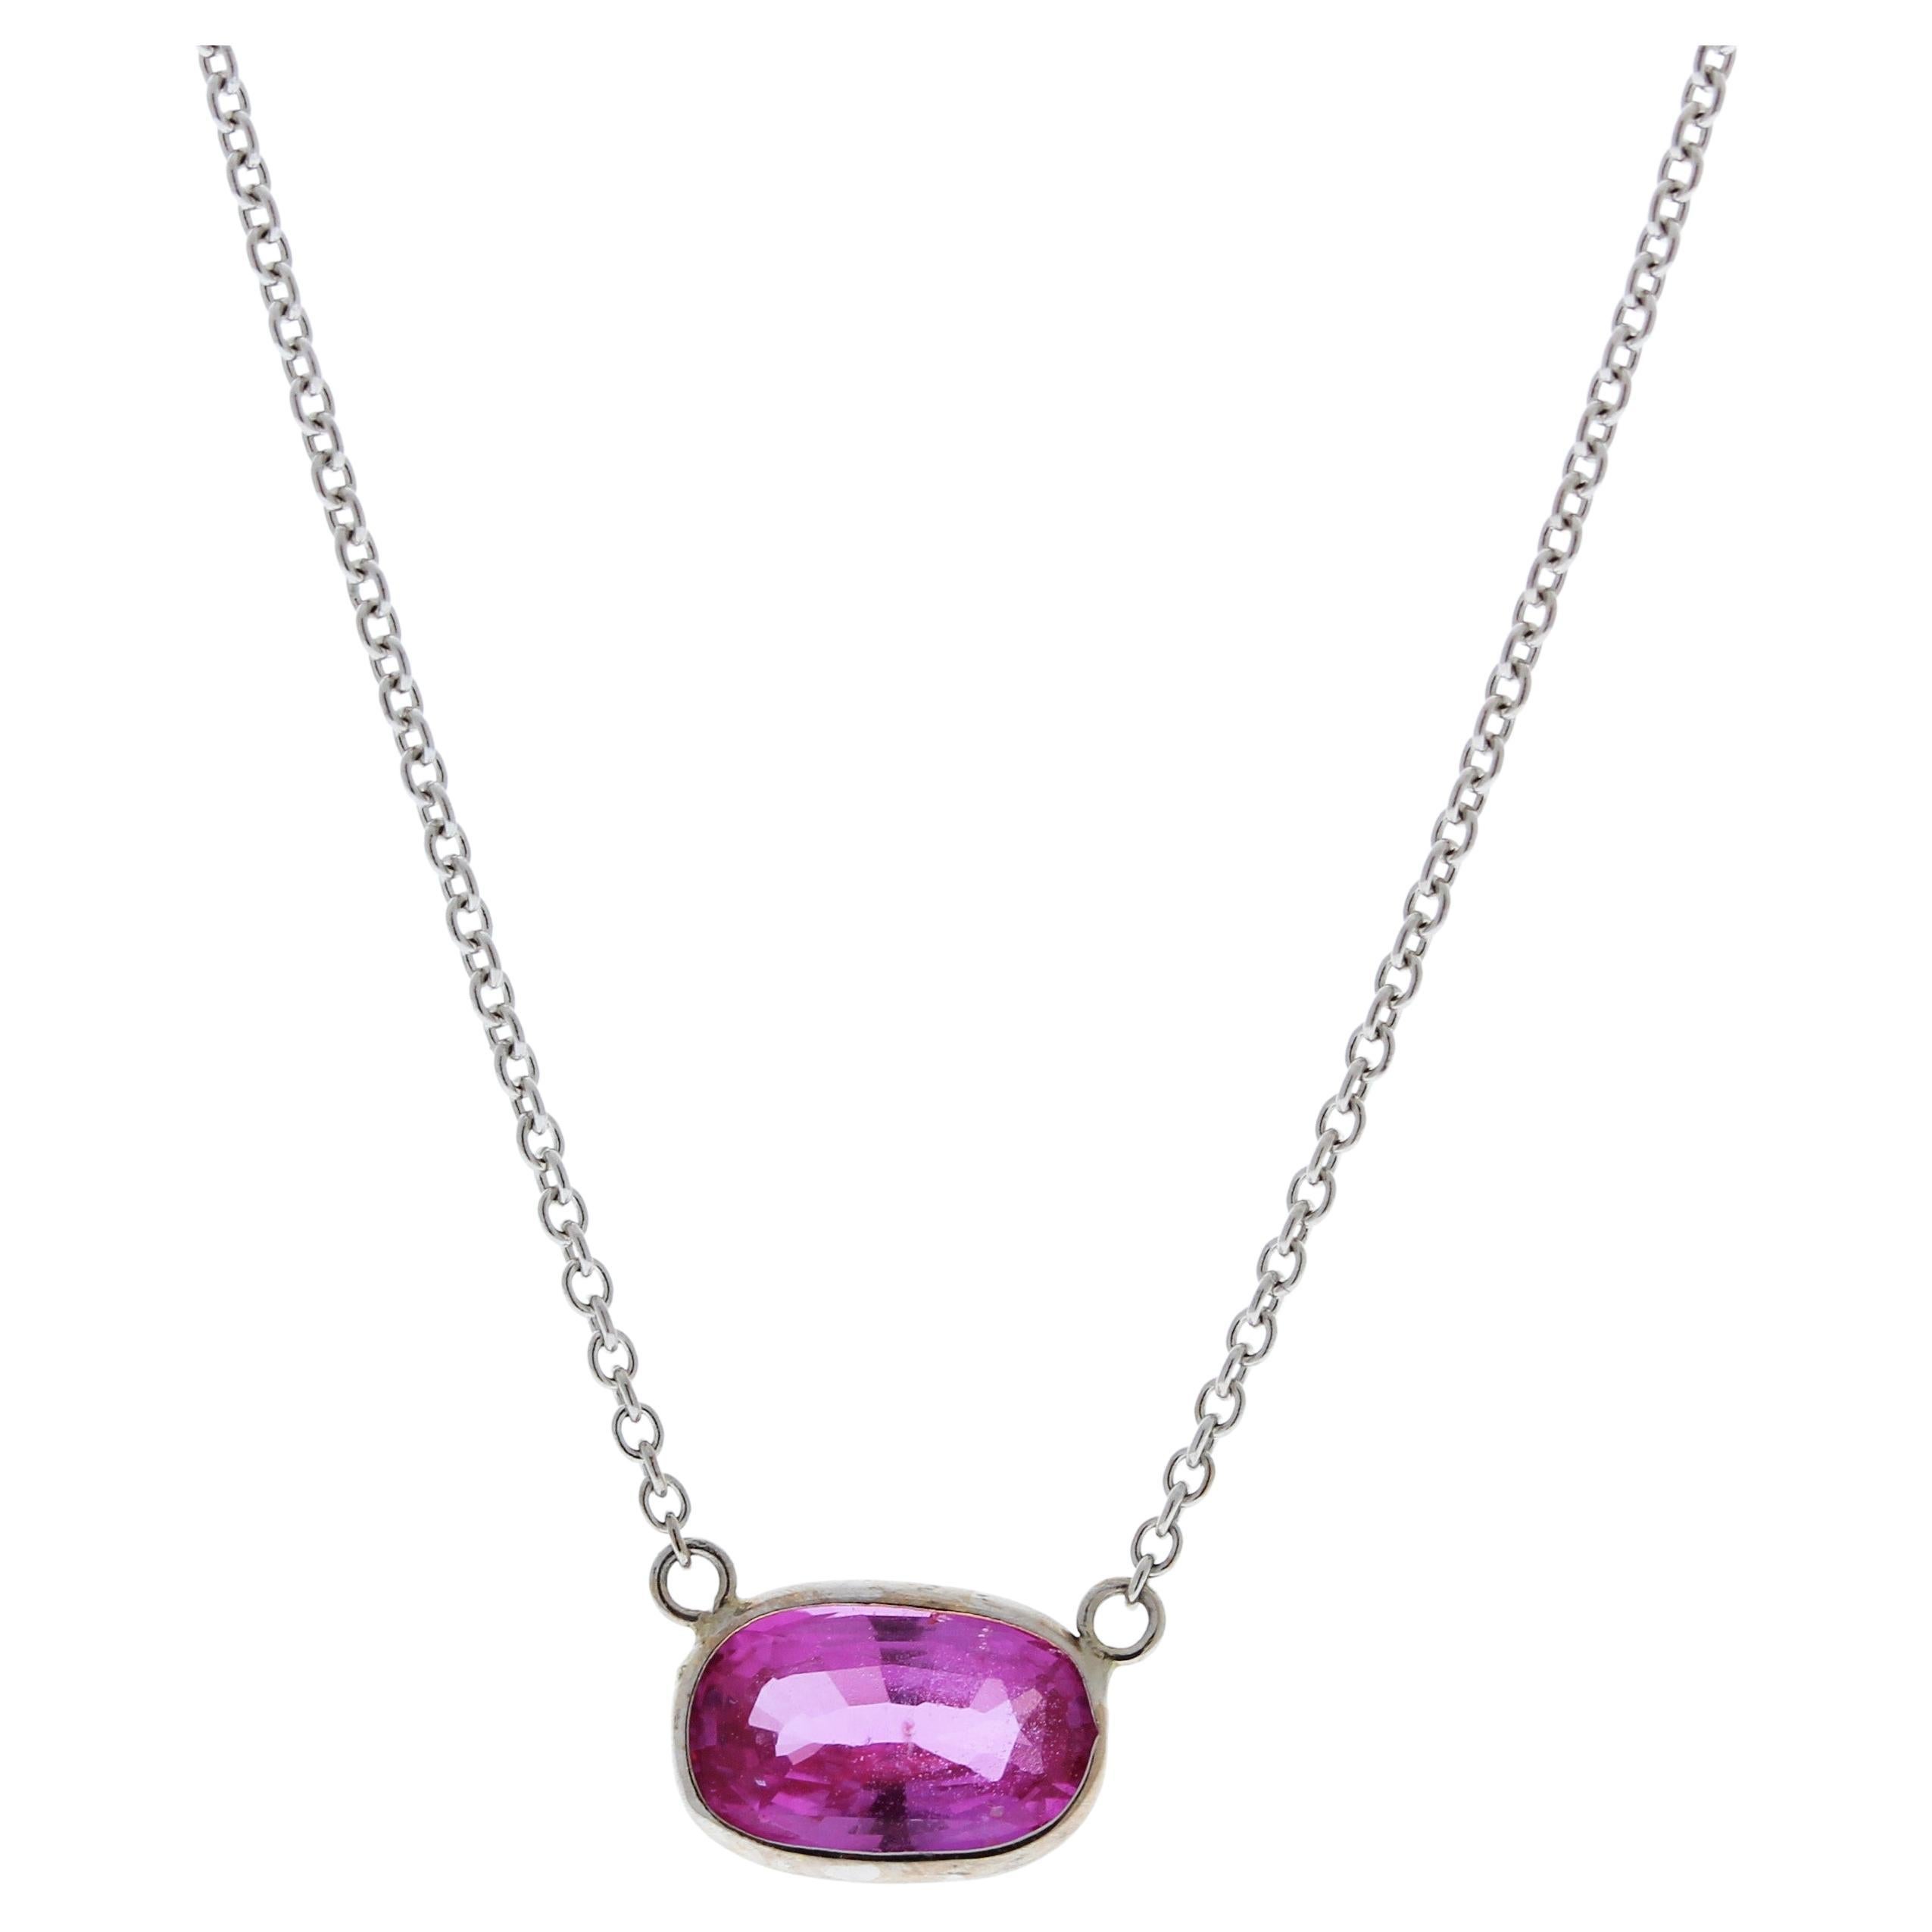 2.15 Carat Cushion Sapphire Pink Fashion Necklaces In 14k White Gold